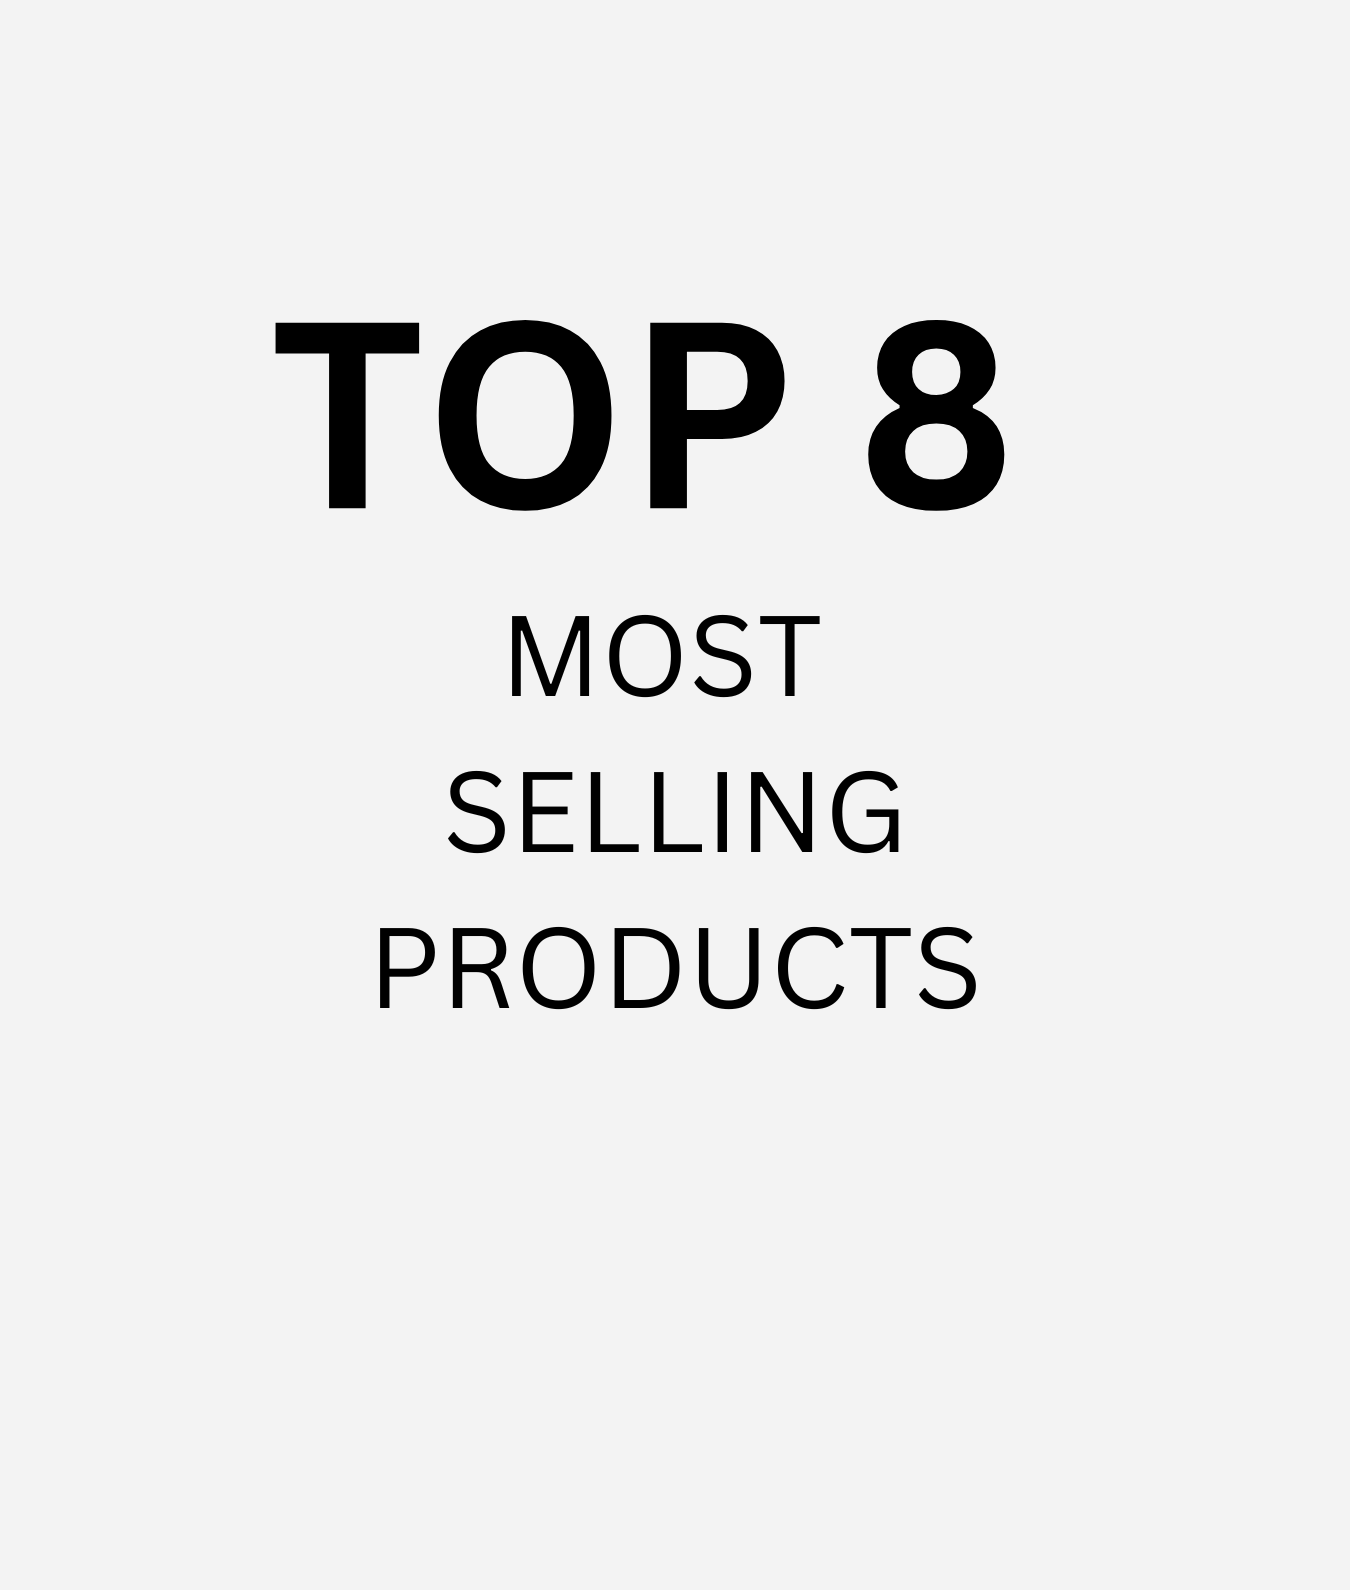 Our 8 Most Selling Products